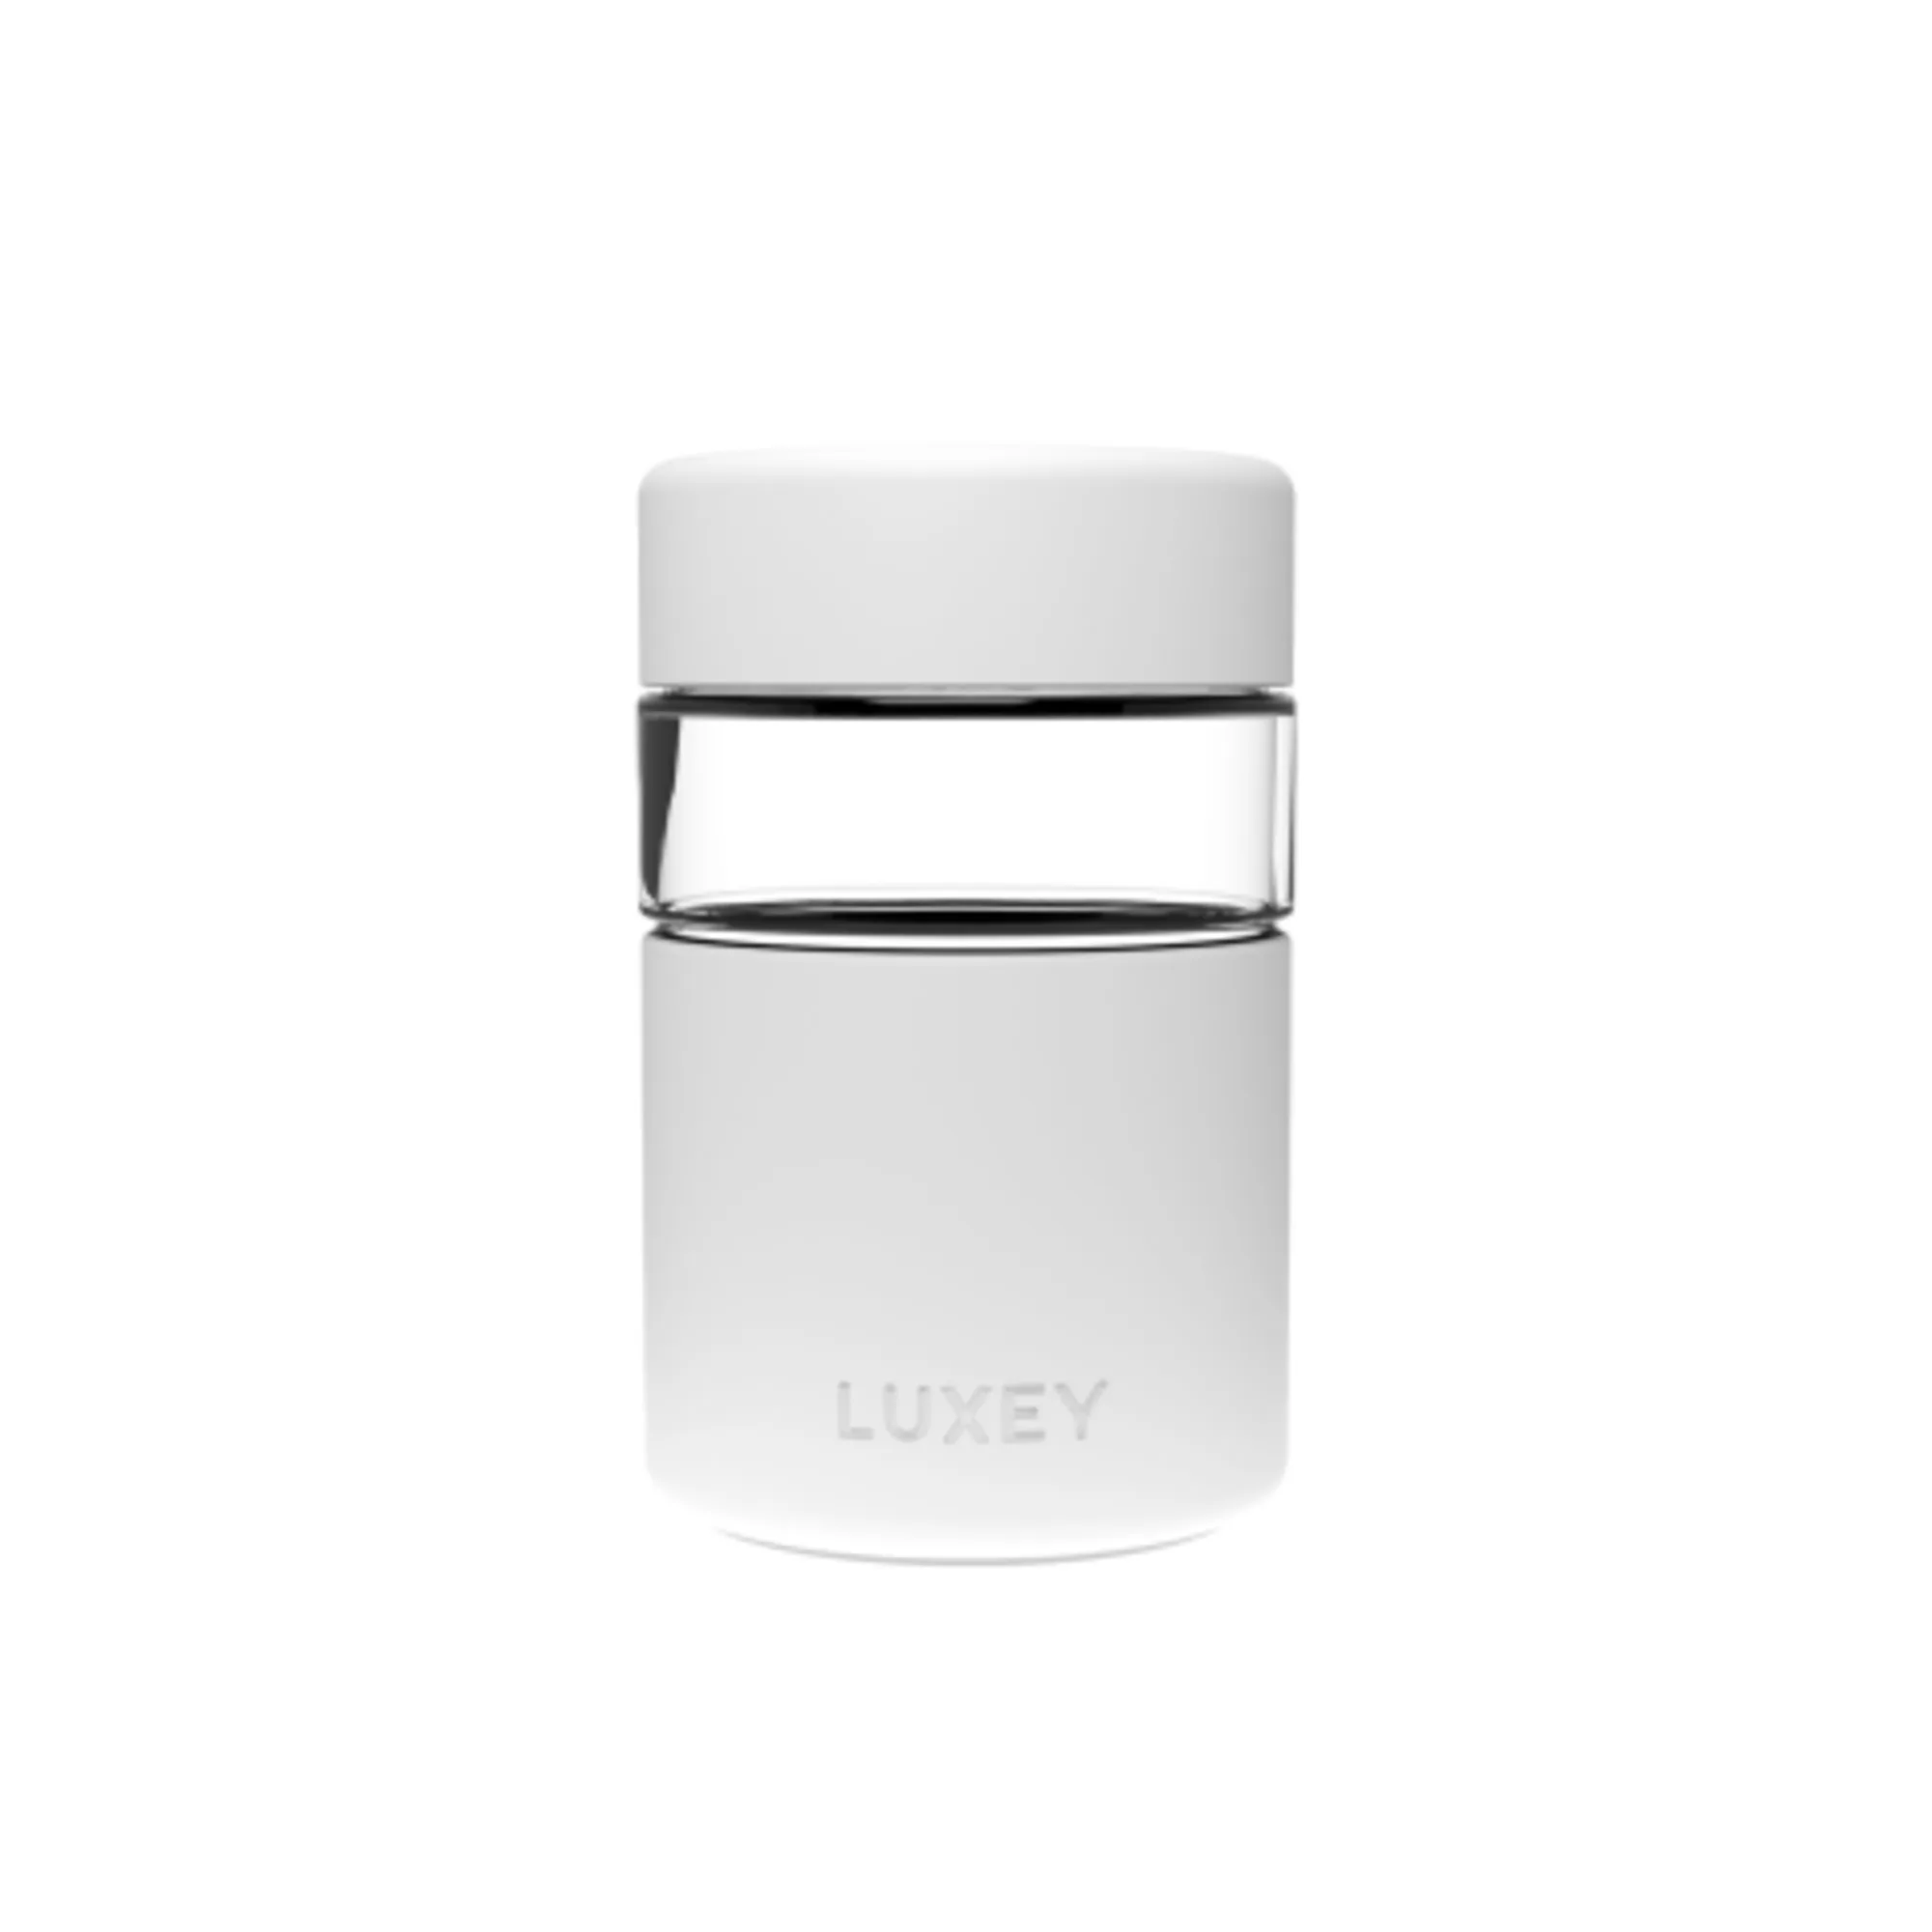 Luxey Cup RegularLUX Glass Cup 237ml (8oz) Bright White Image 1